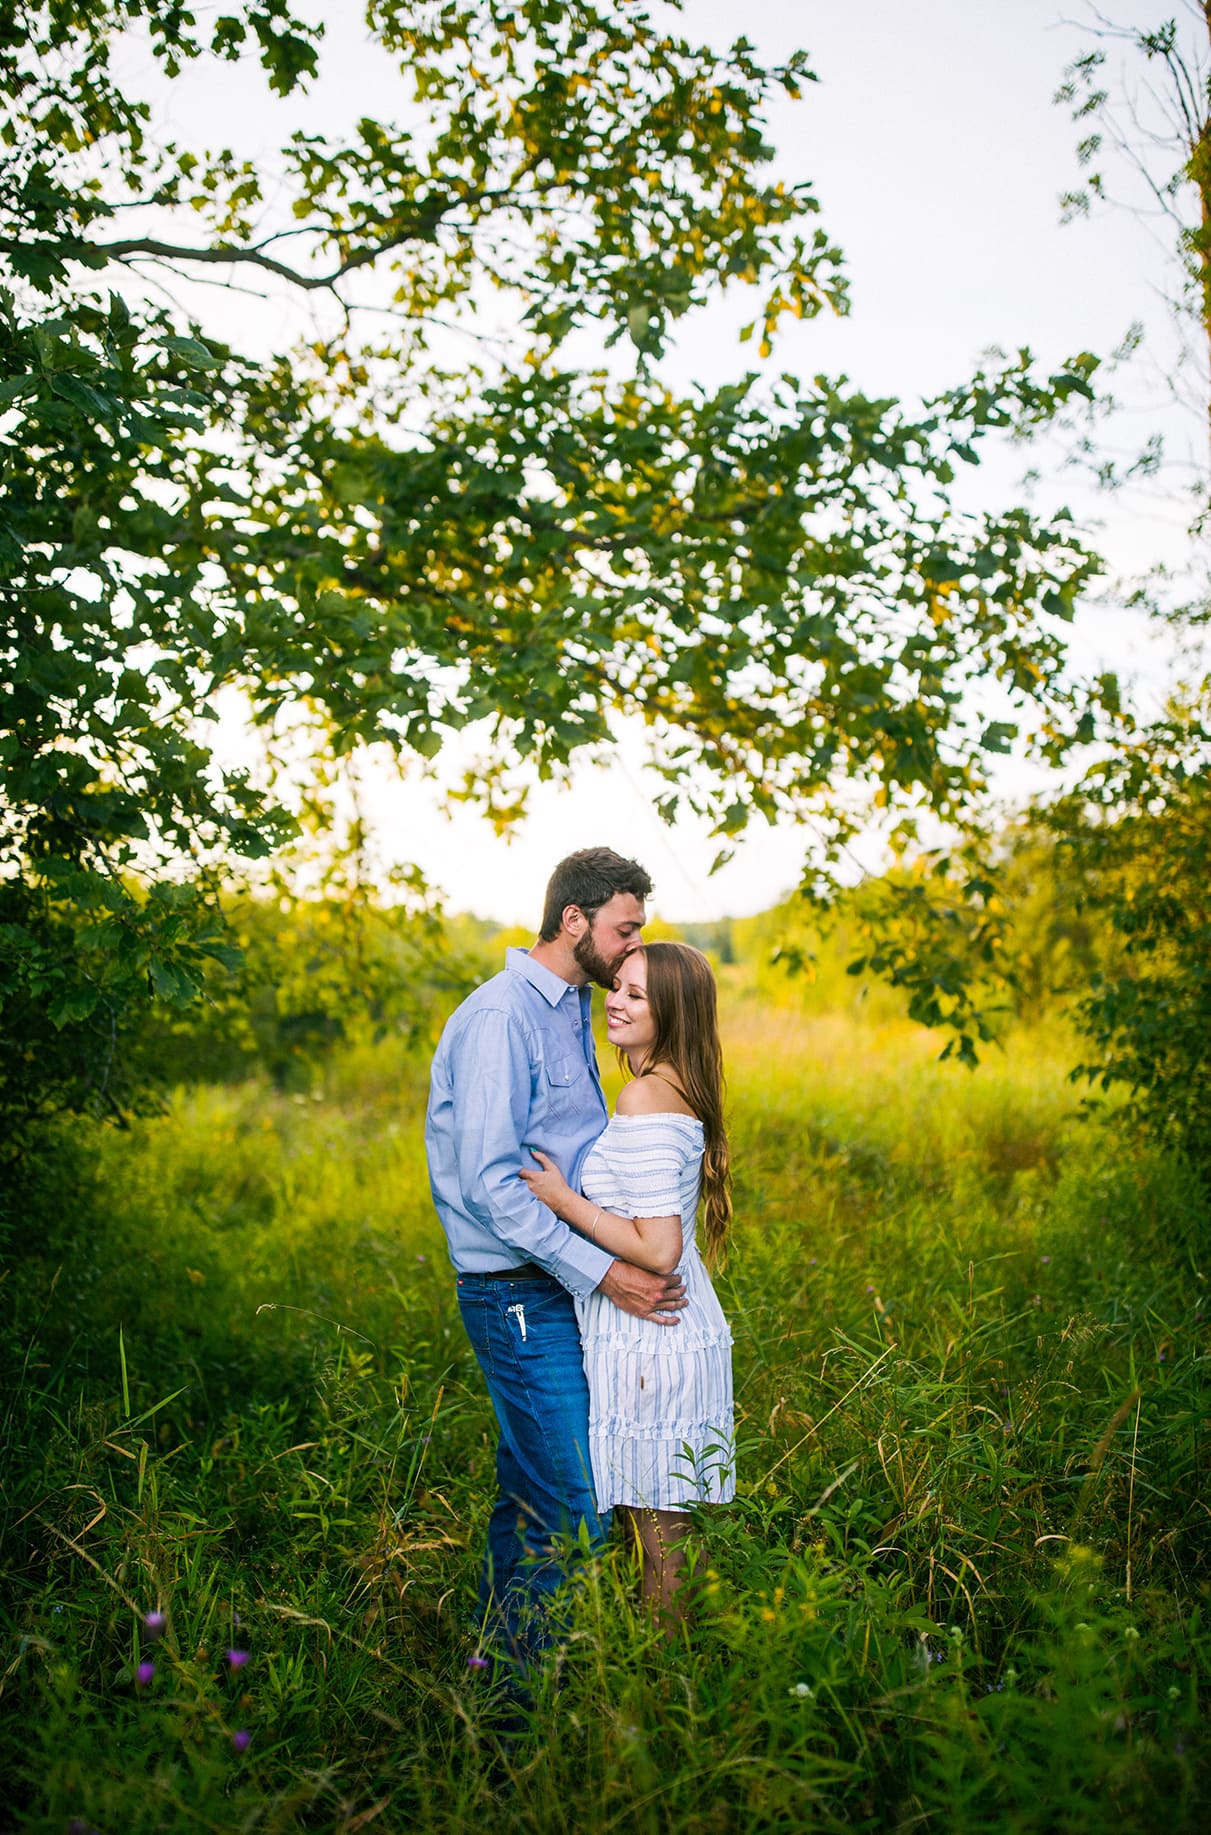 Couple embraces in field of tall grass during golden hour in Albany NY engagement session